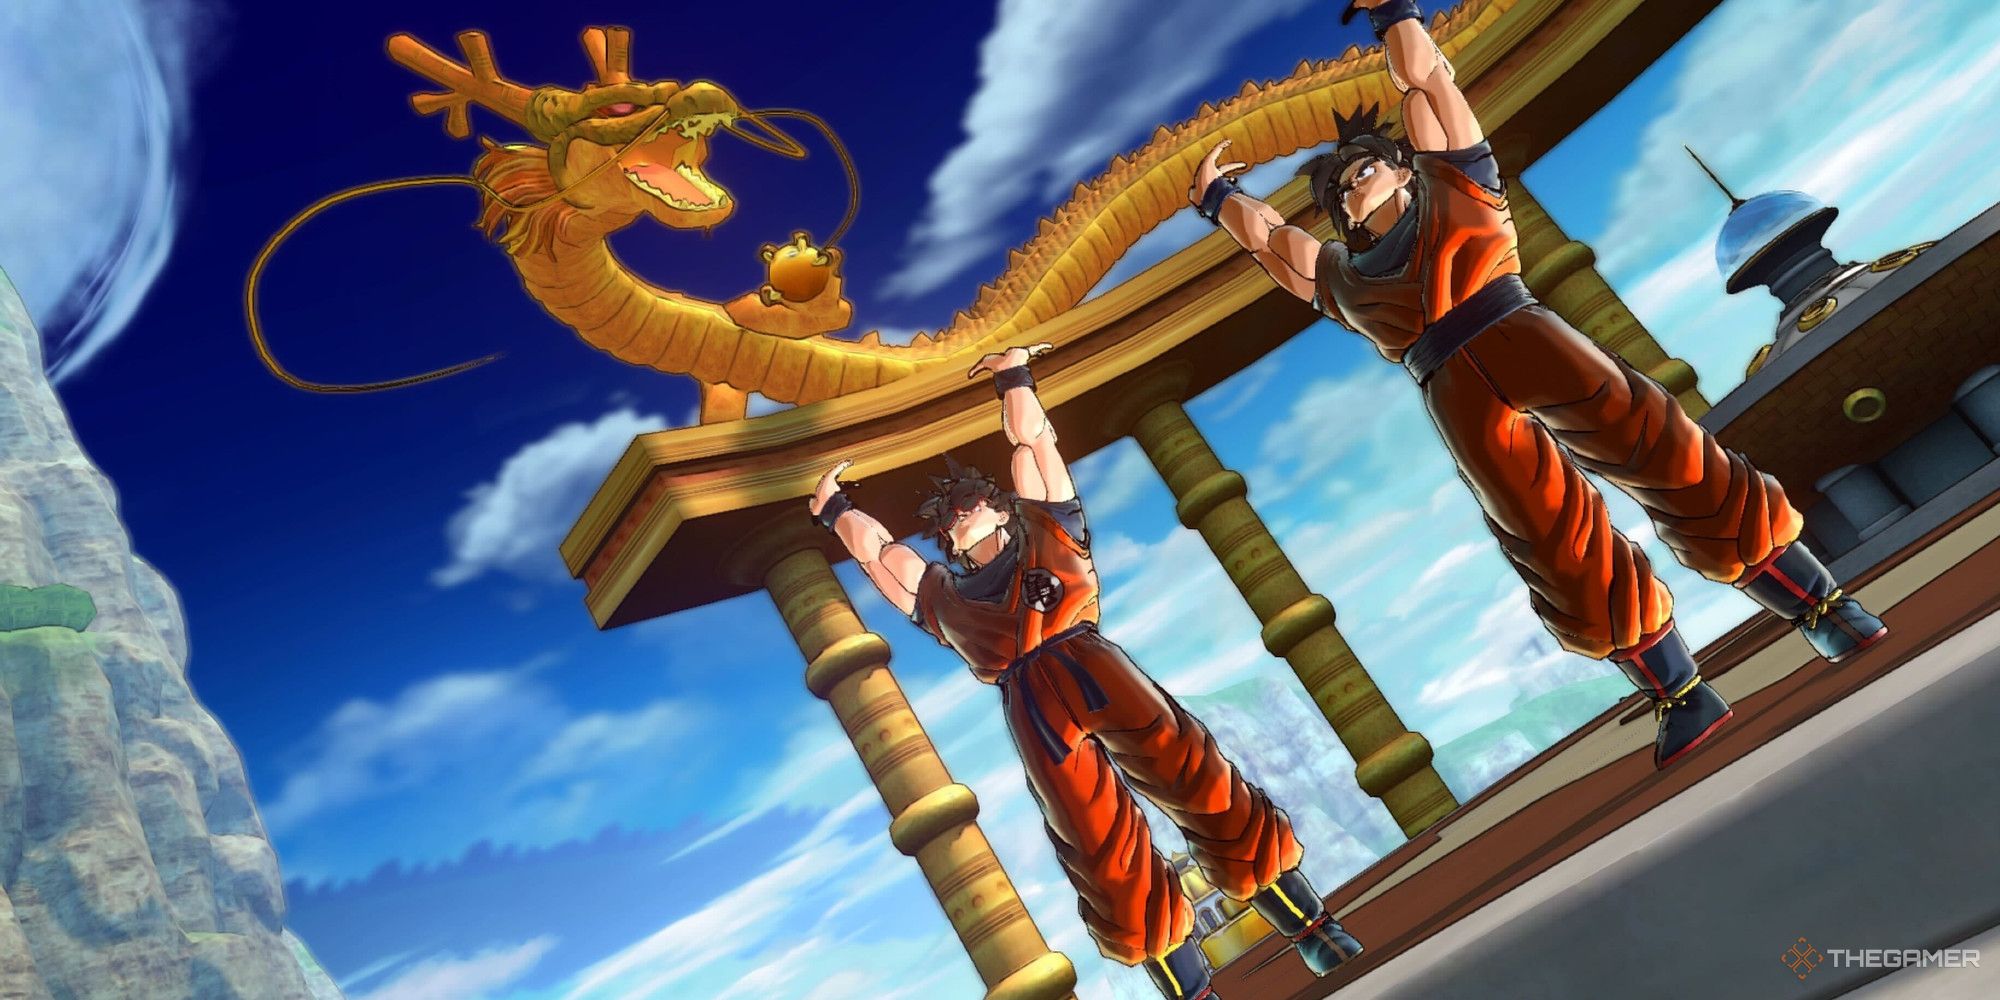 Two players in Dragon Ball Xenoverse 2 with their hands raised in the air next to a pedestal and large dragon statue